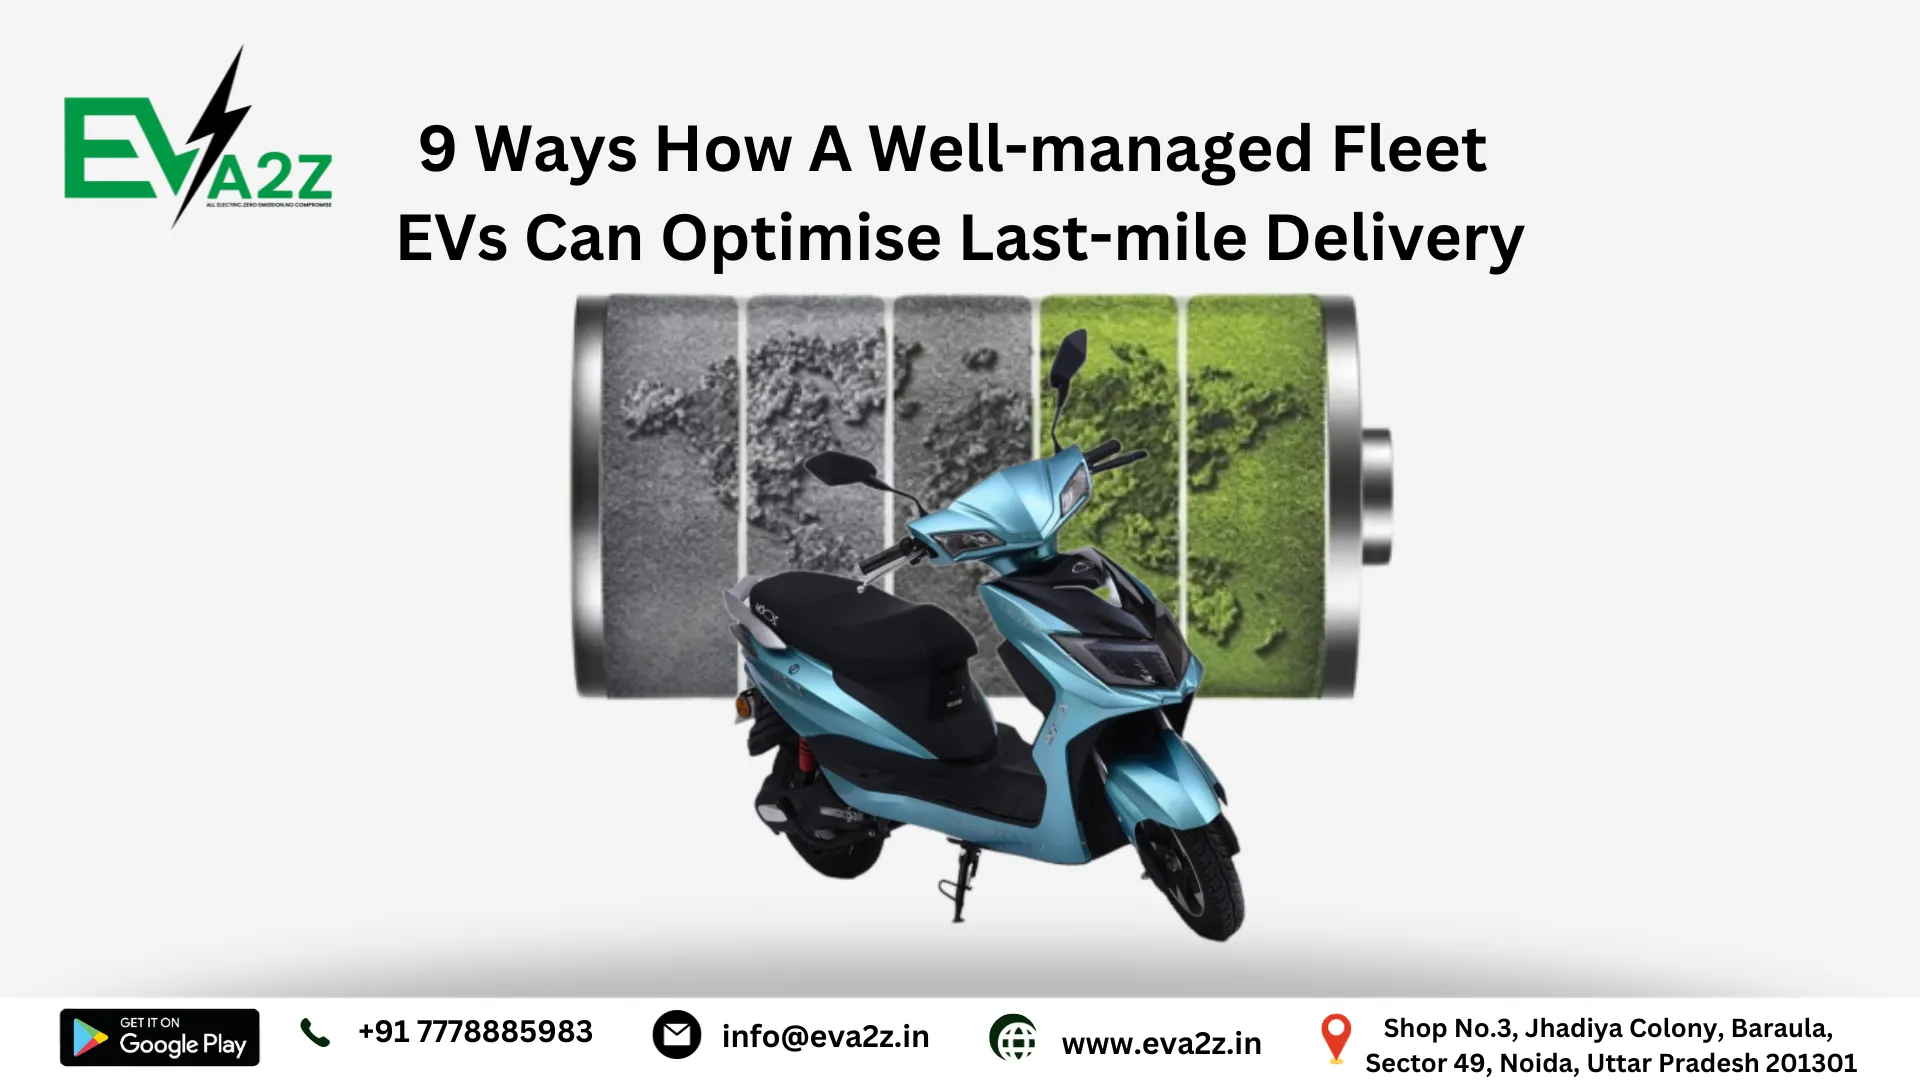 9 ways how a well-managed fleet of EVs can optimise last-mile delivery